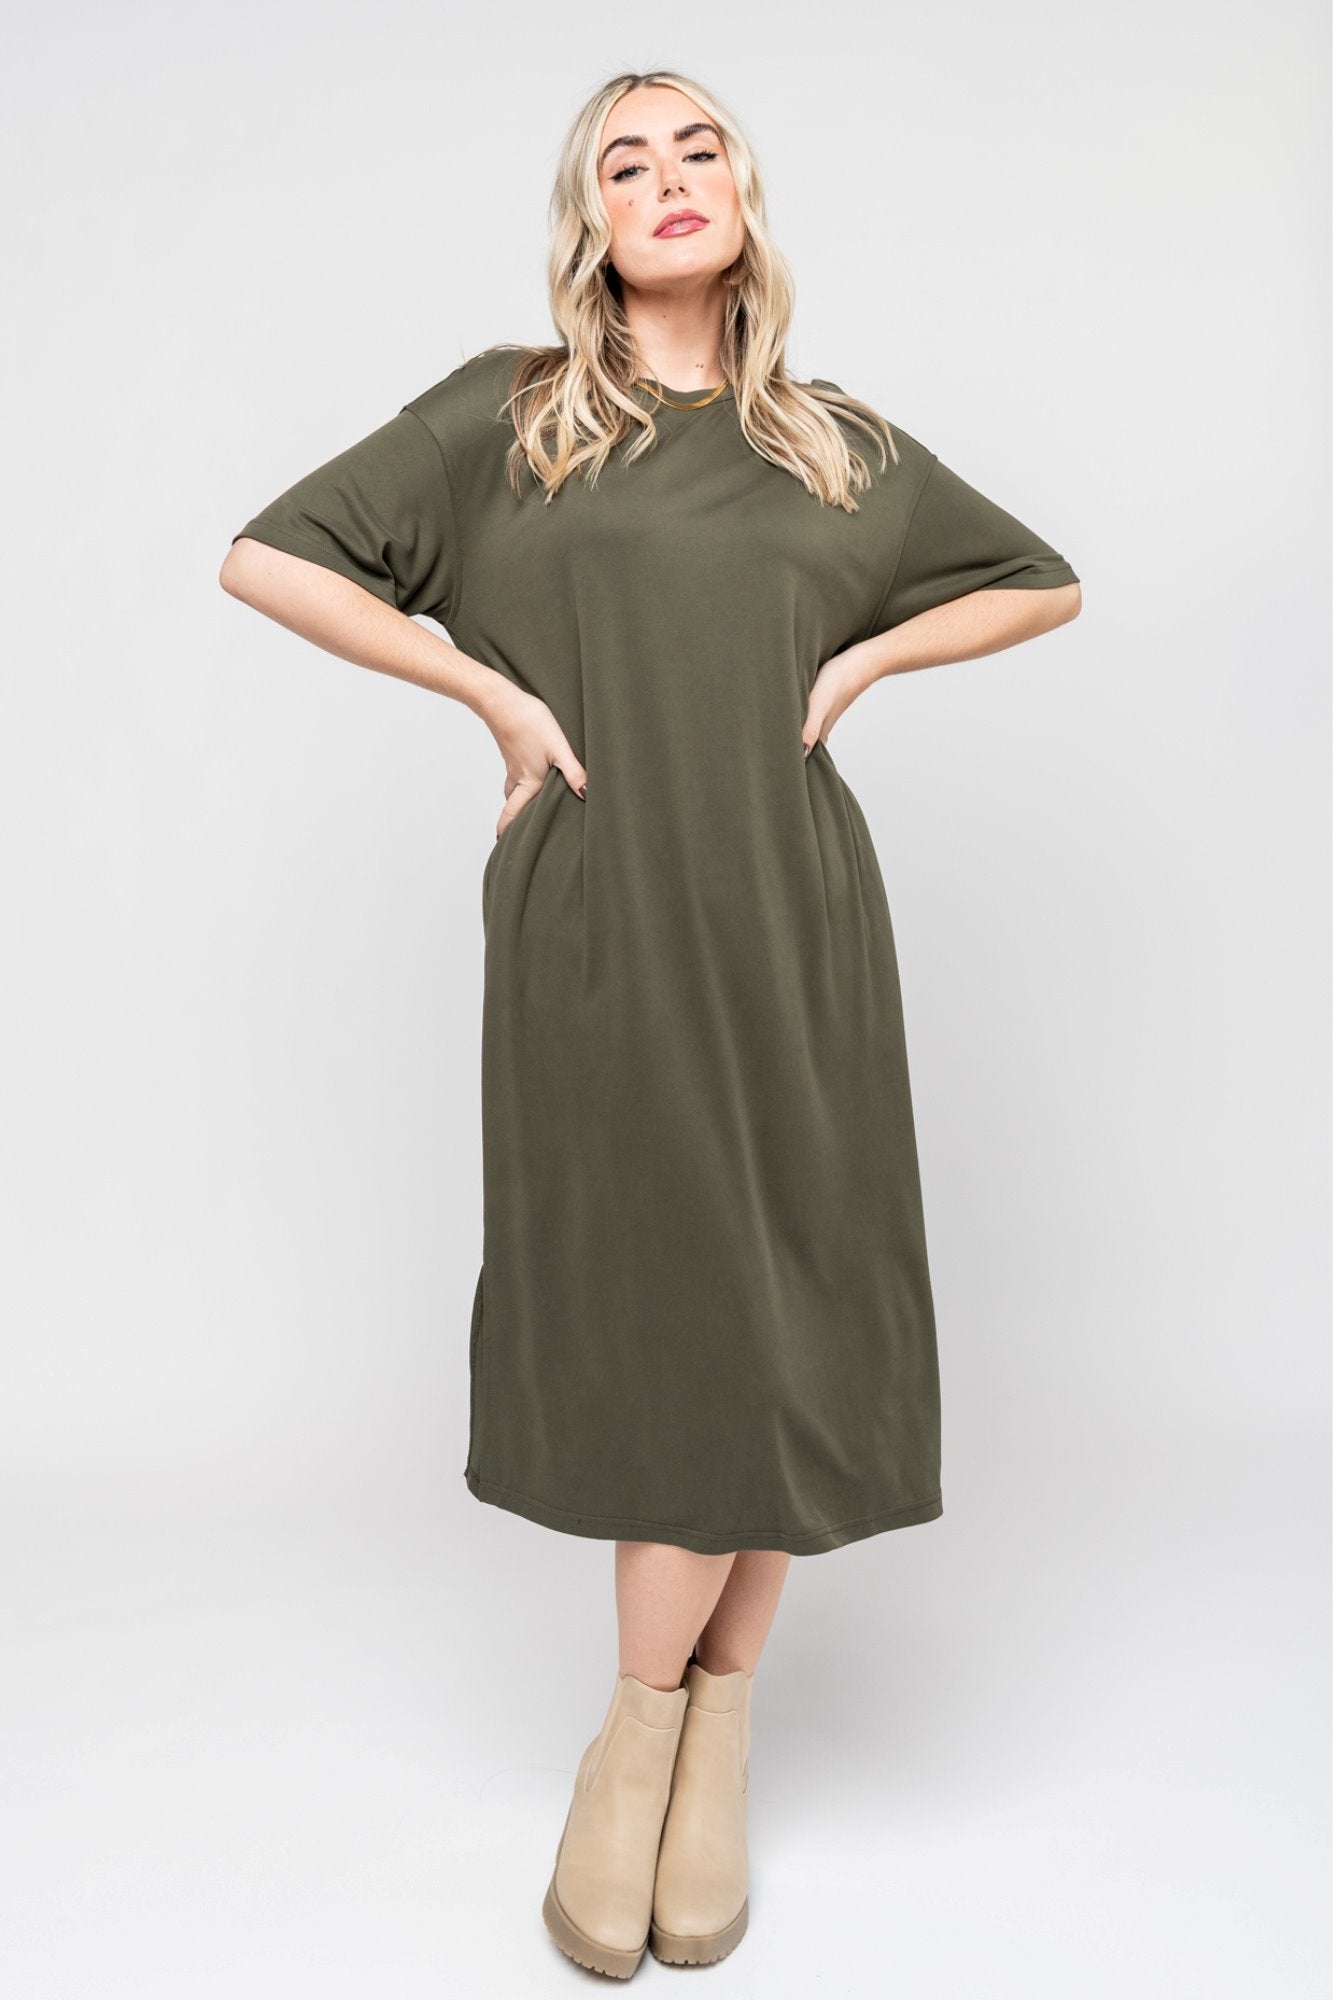 Maeve Dress in Olive Holley Girl 